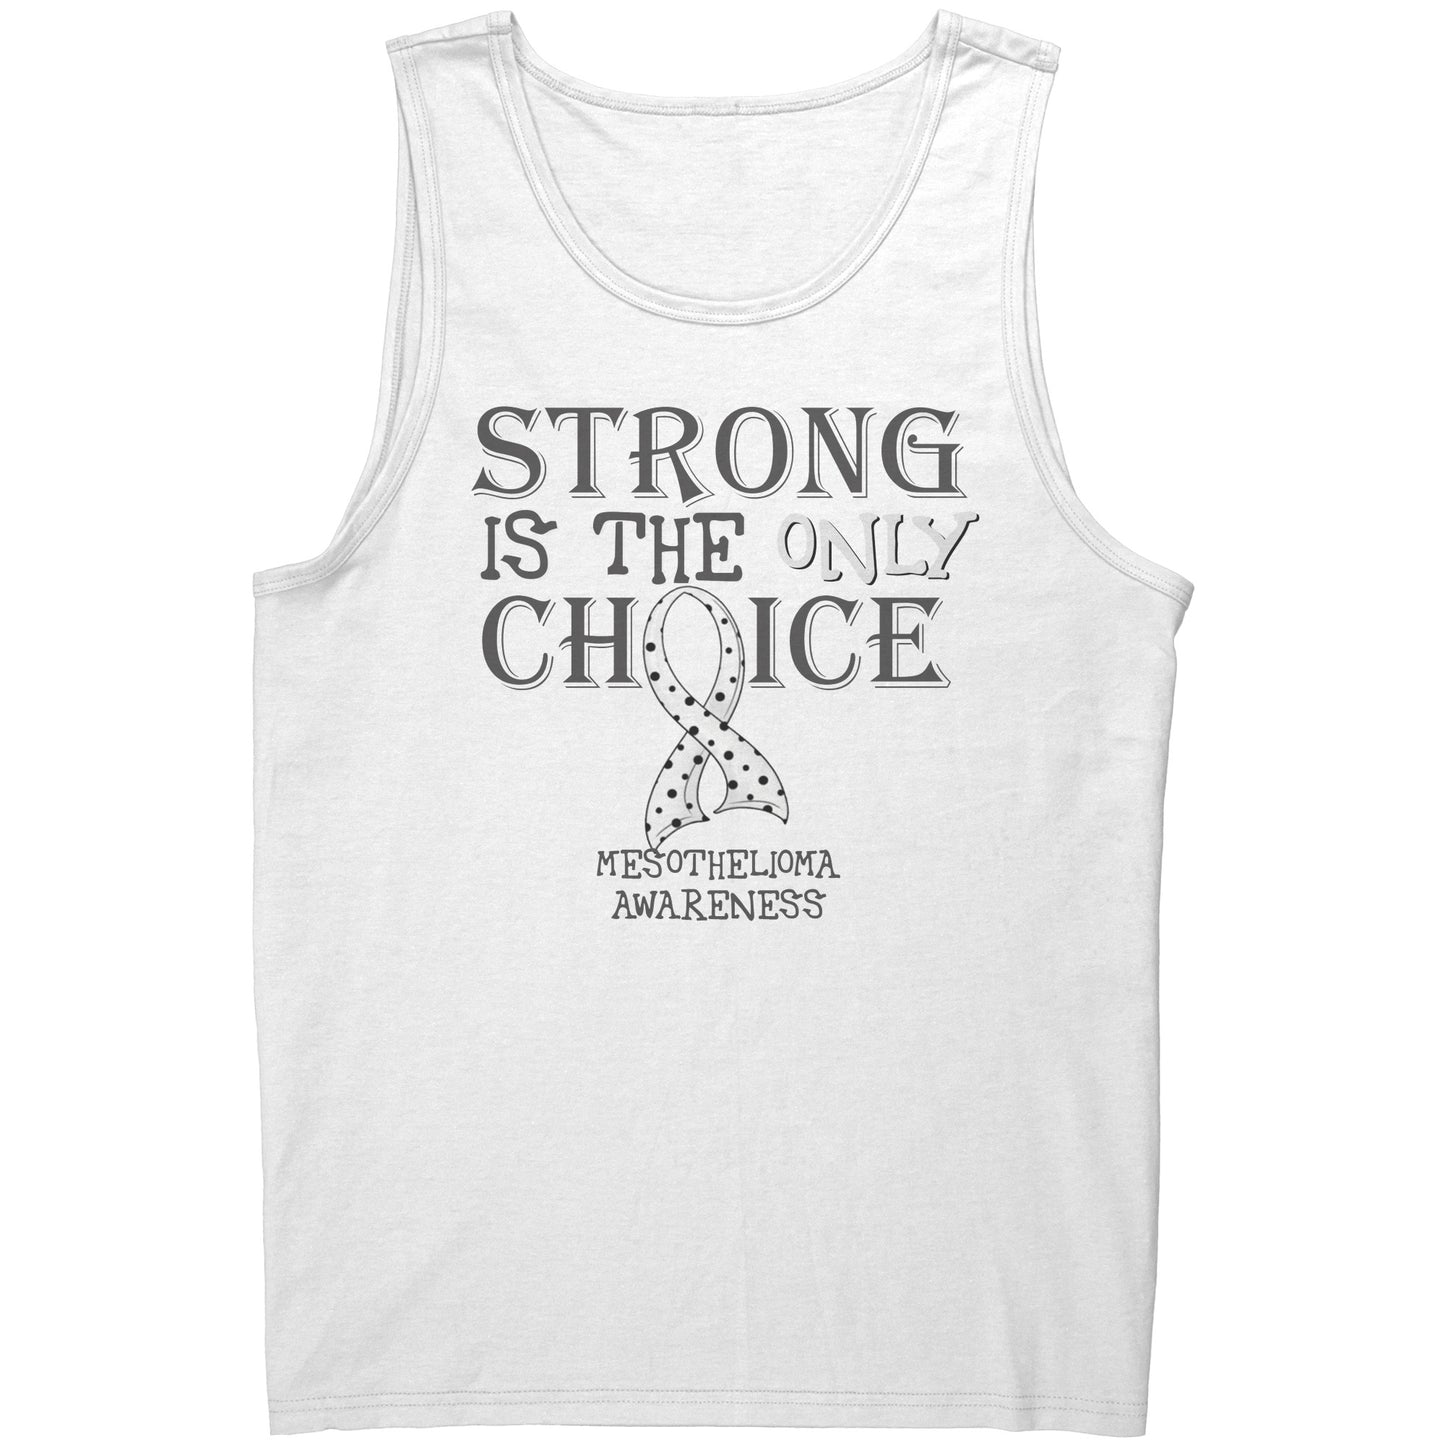 Strong is the Only Choice -Mesothelioma Awareness T-Shirt, Hoodie, Tank